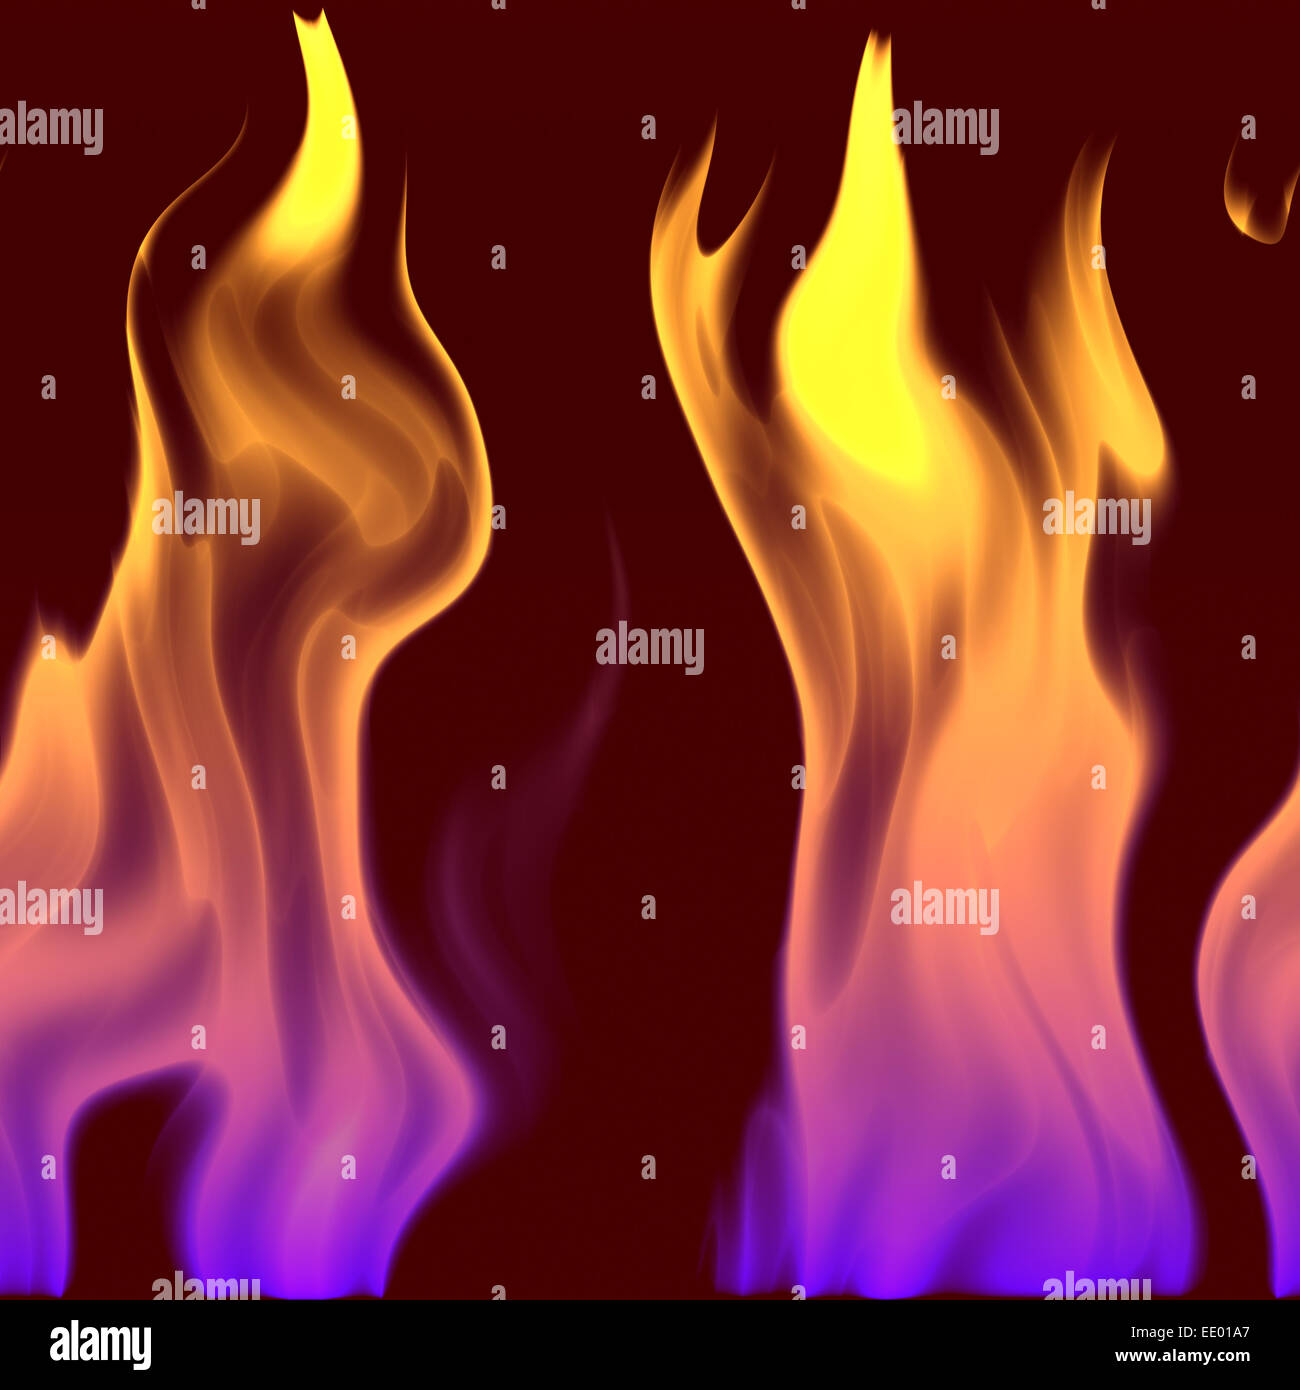 Fiery flame closeup view with seamless tiling Stock Photo